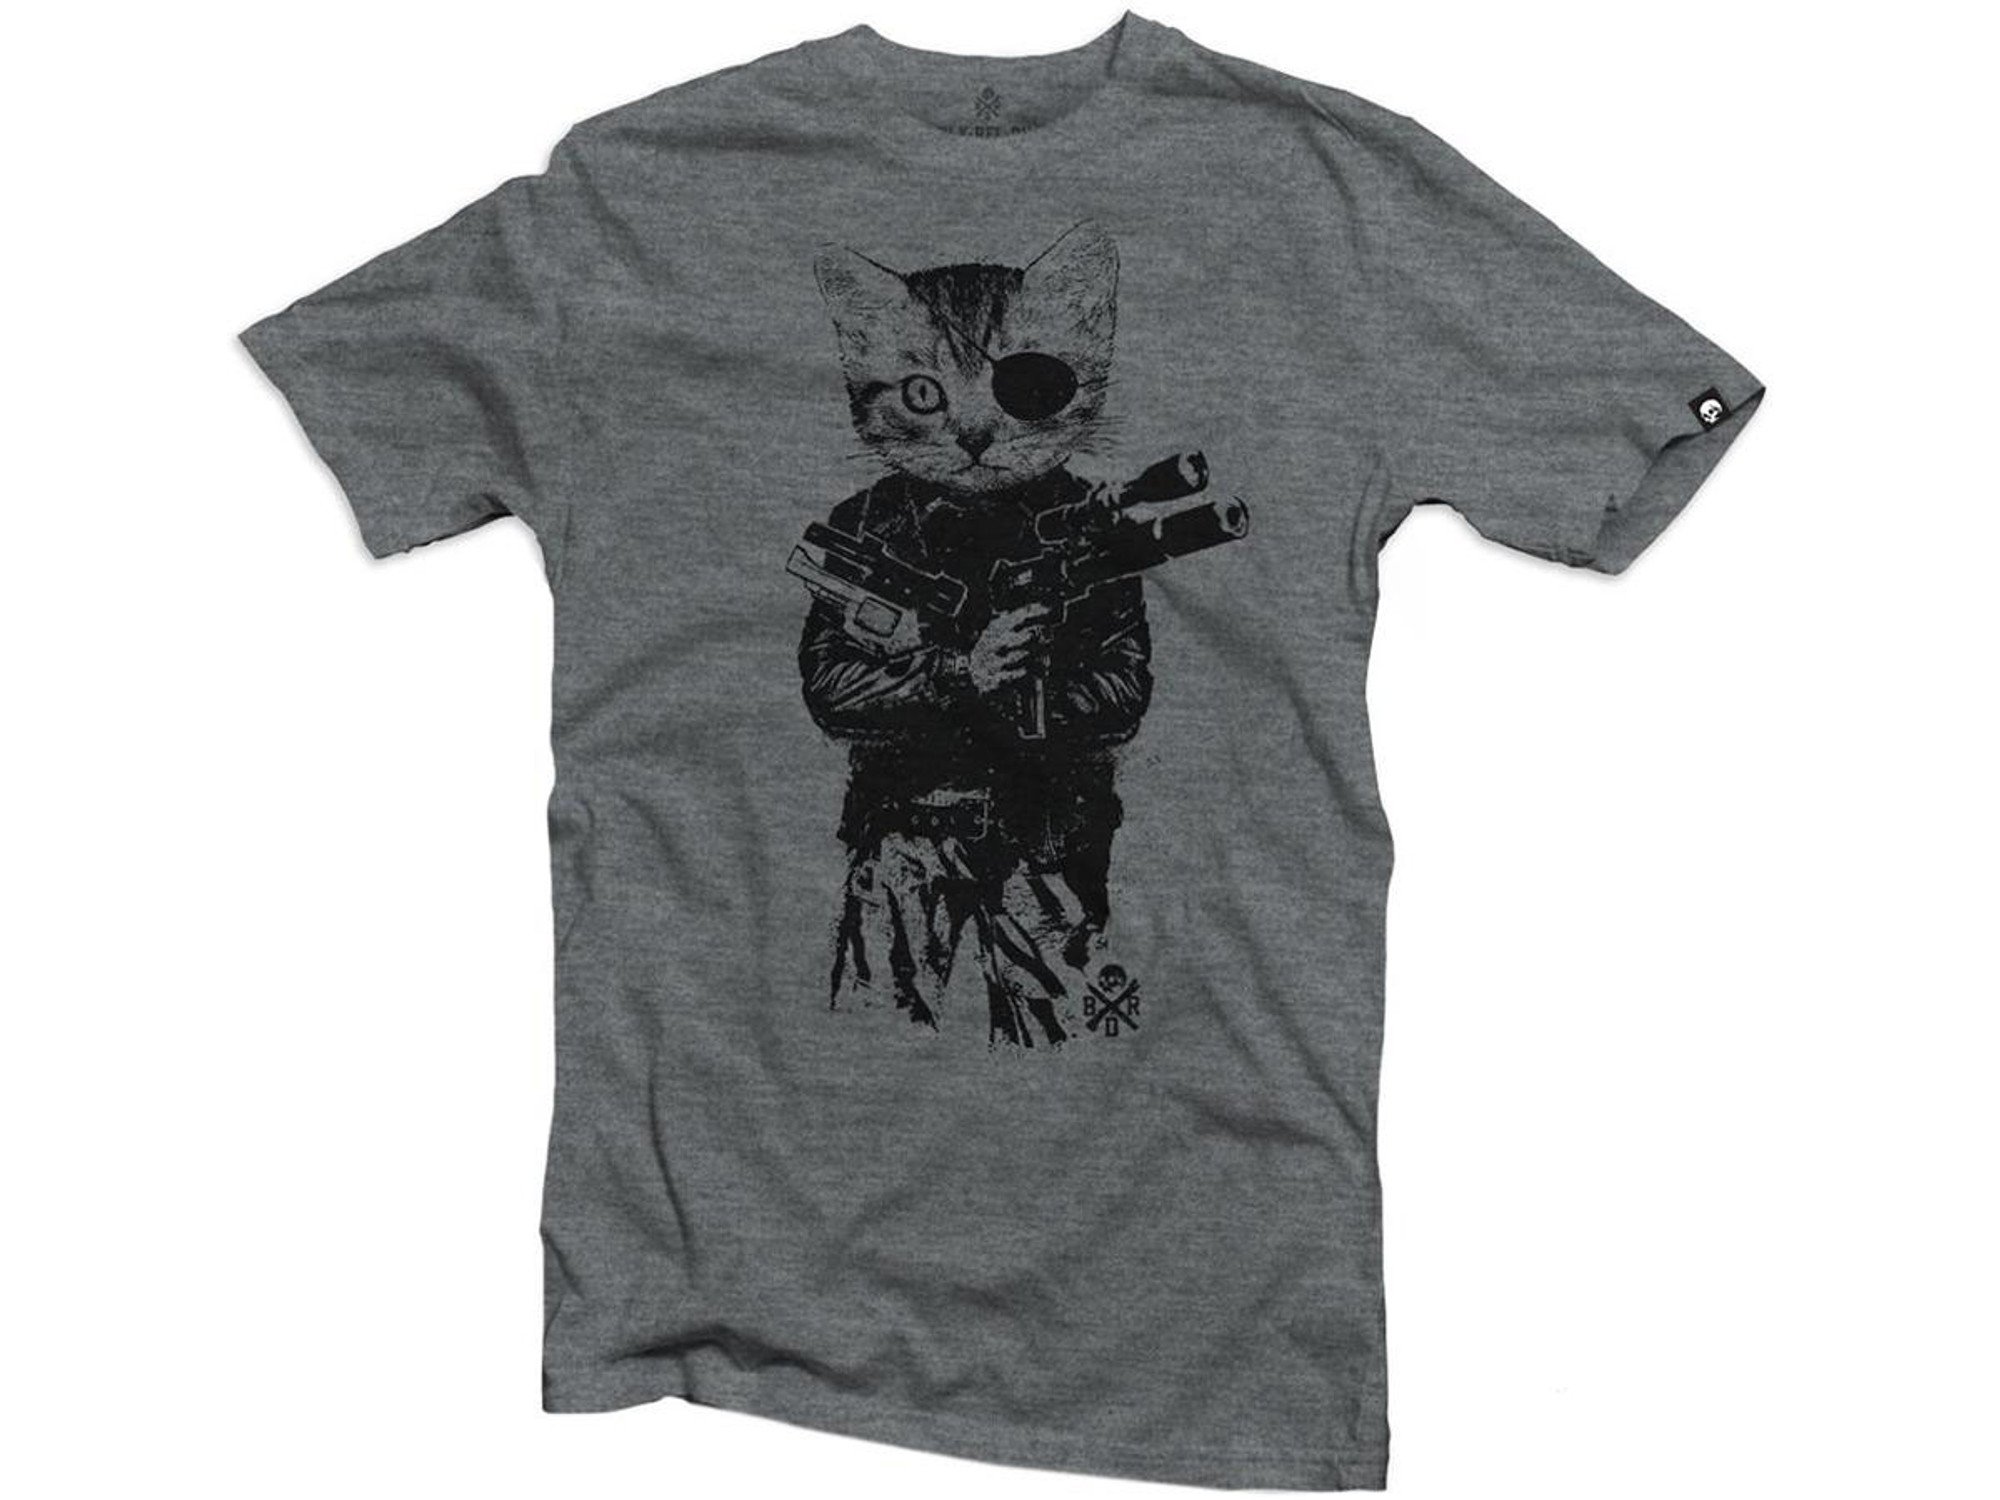 Black Rifle Division "Mr. Whiskers" Shirt (Color: Graphite Heather)